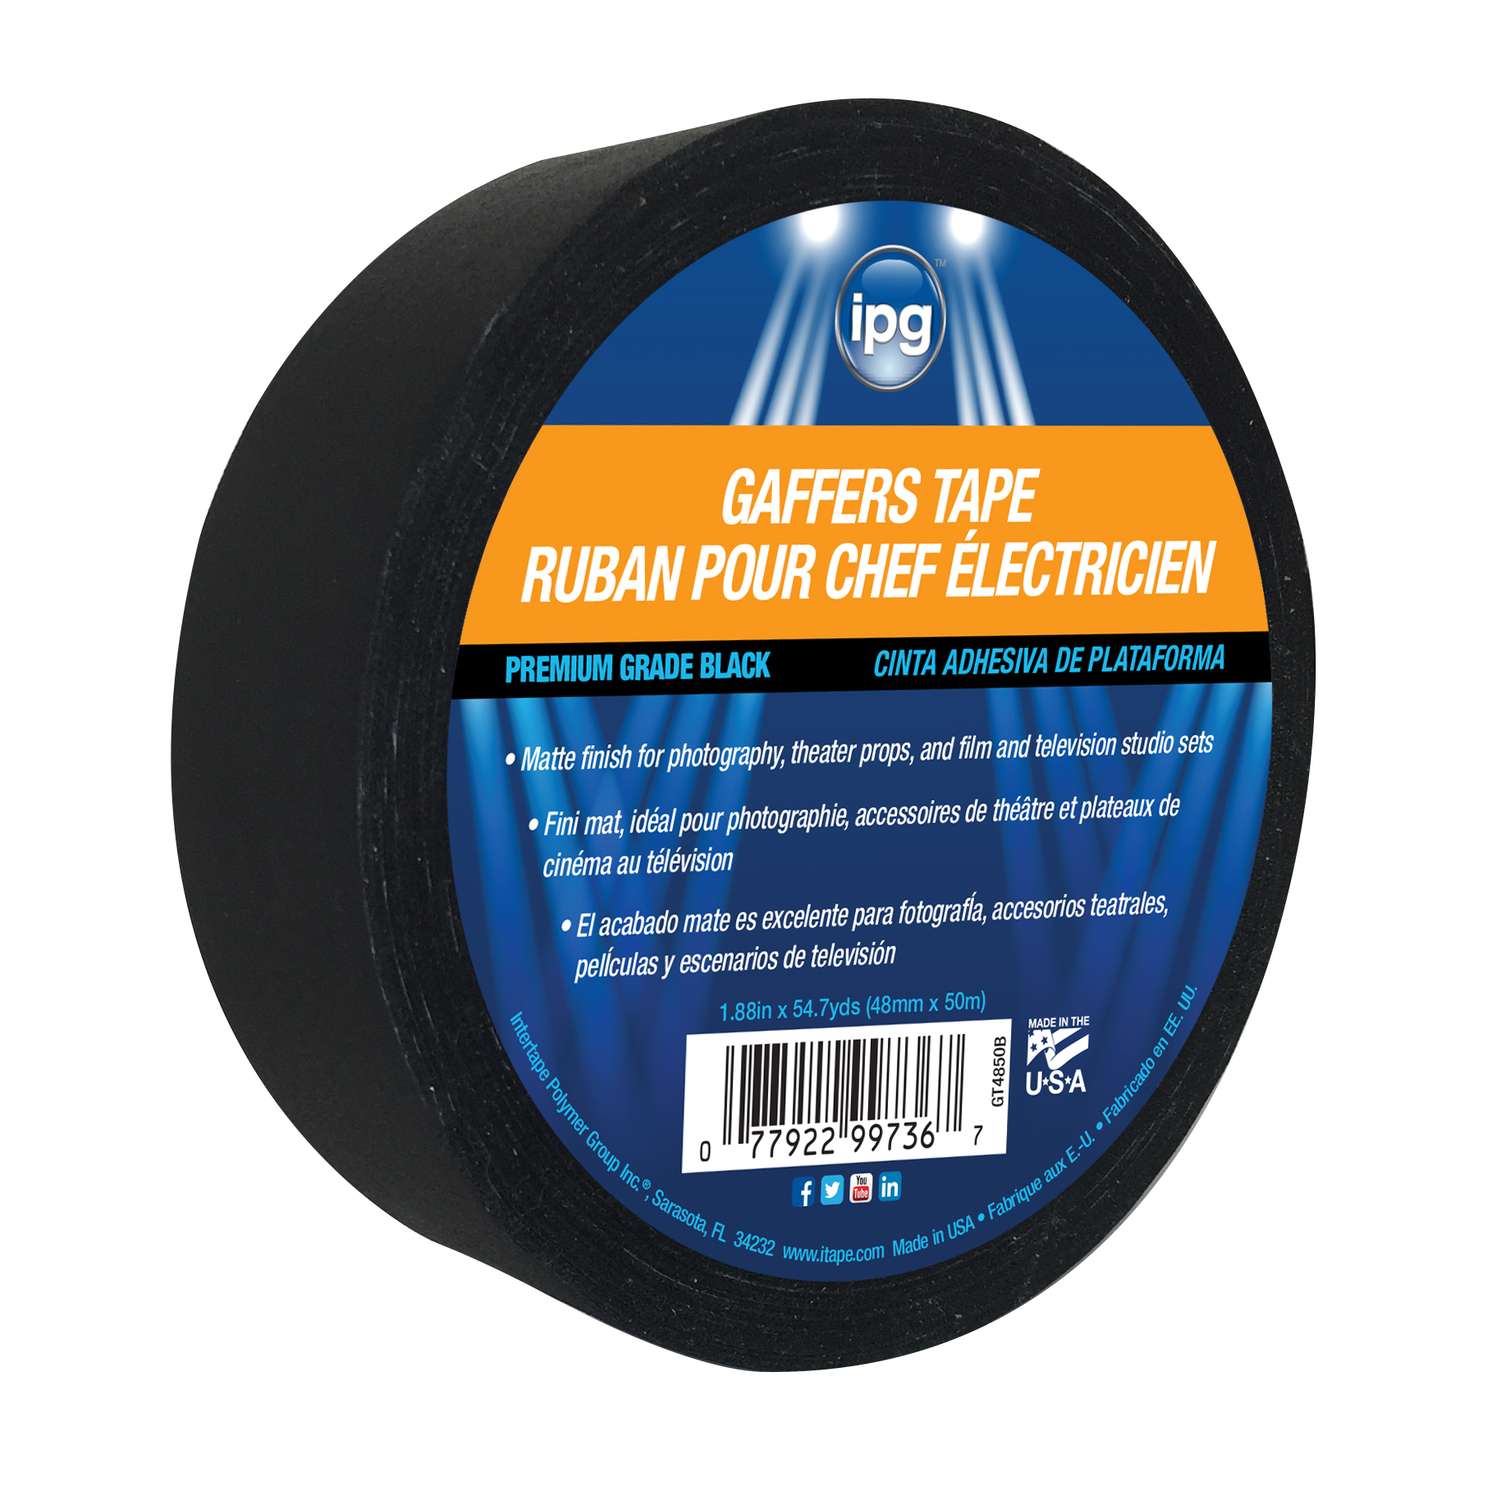 Pro Gaff Gaffers Tape 1 and 2 inch widths, 17 colors available, 2 inch,  Black